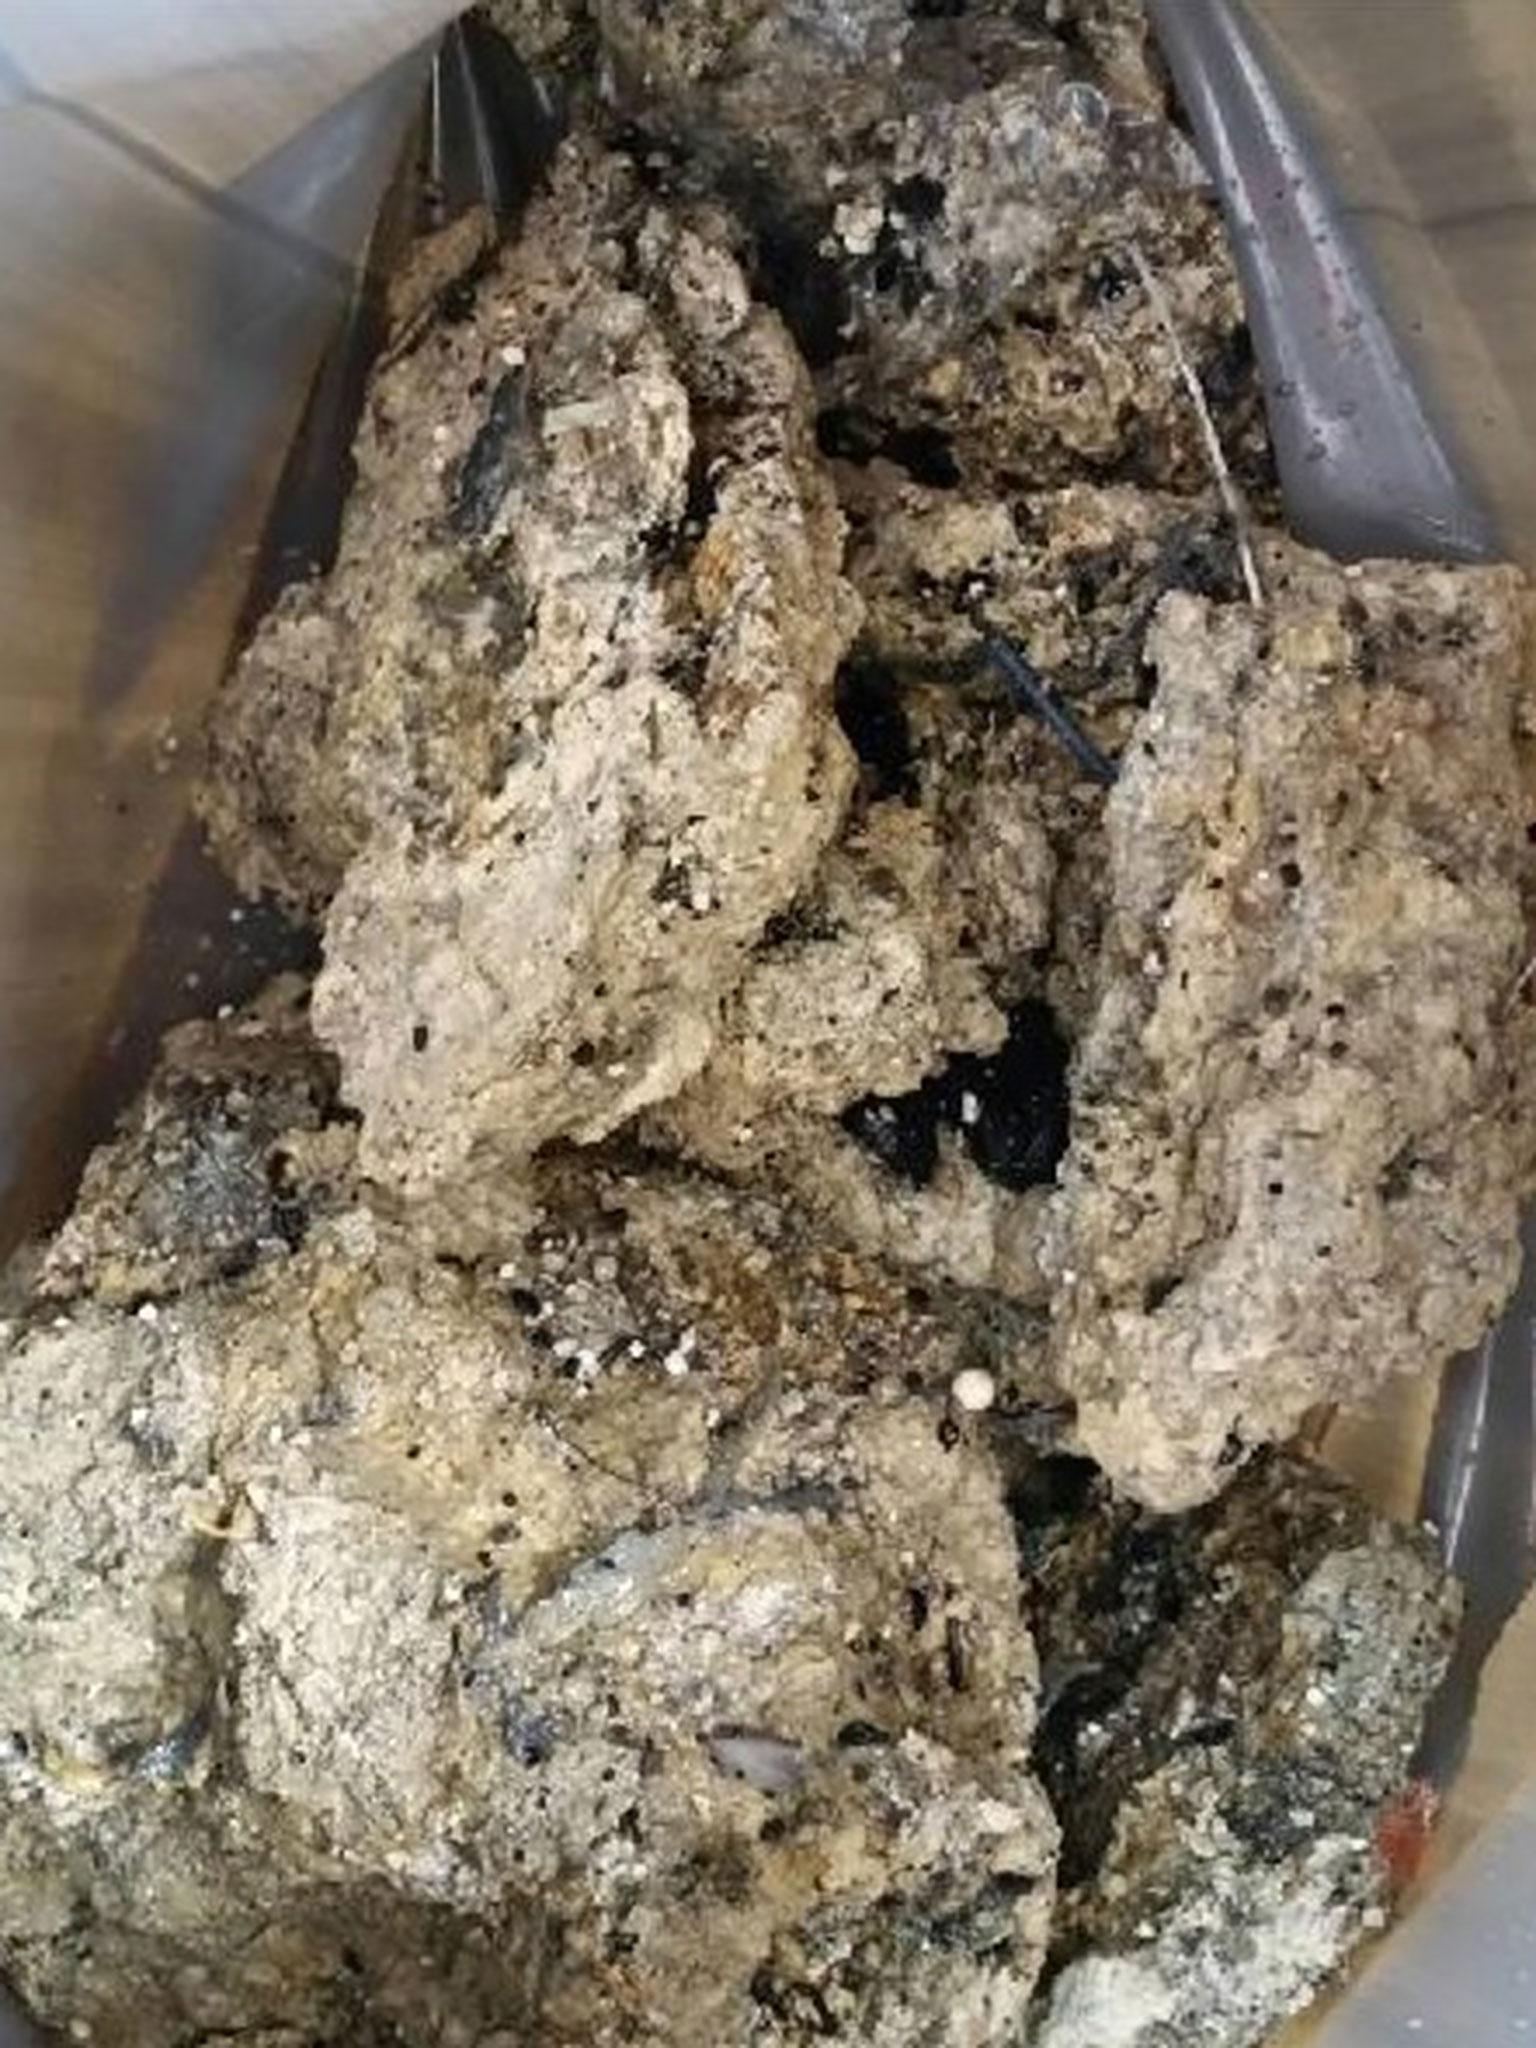 An eight-man crew are using high-powered jet hoses to break up the fatberg